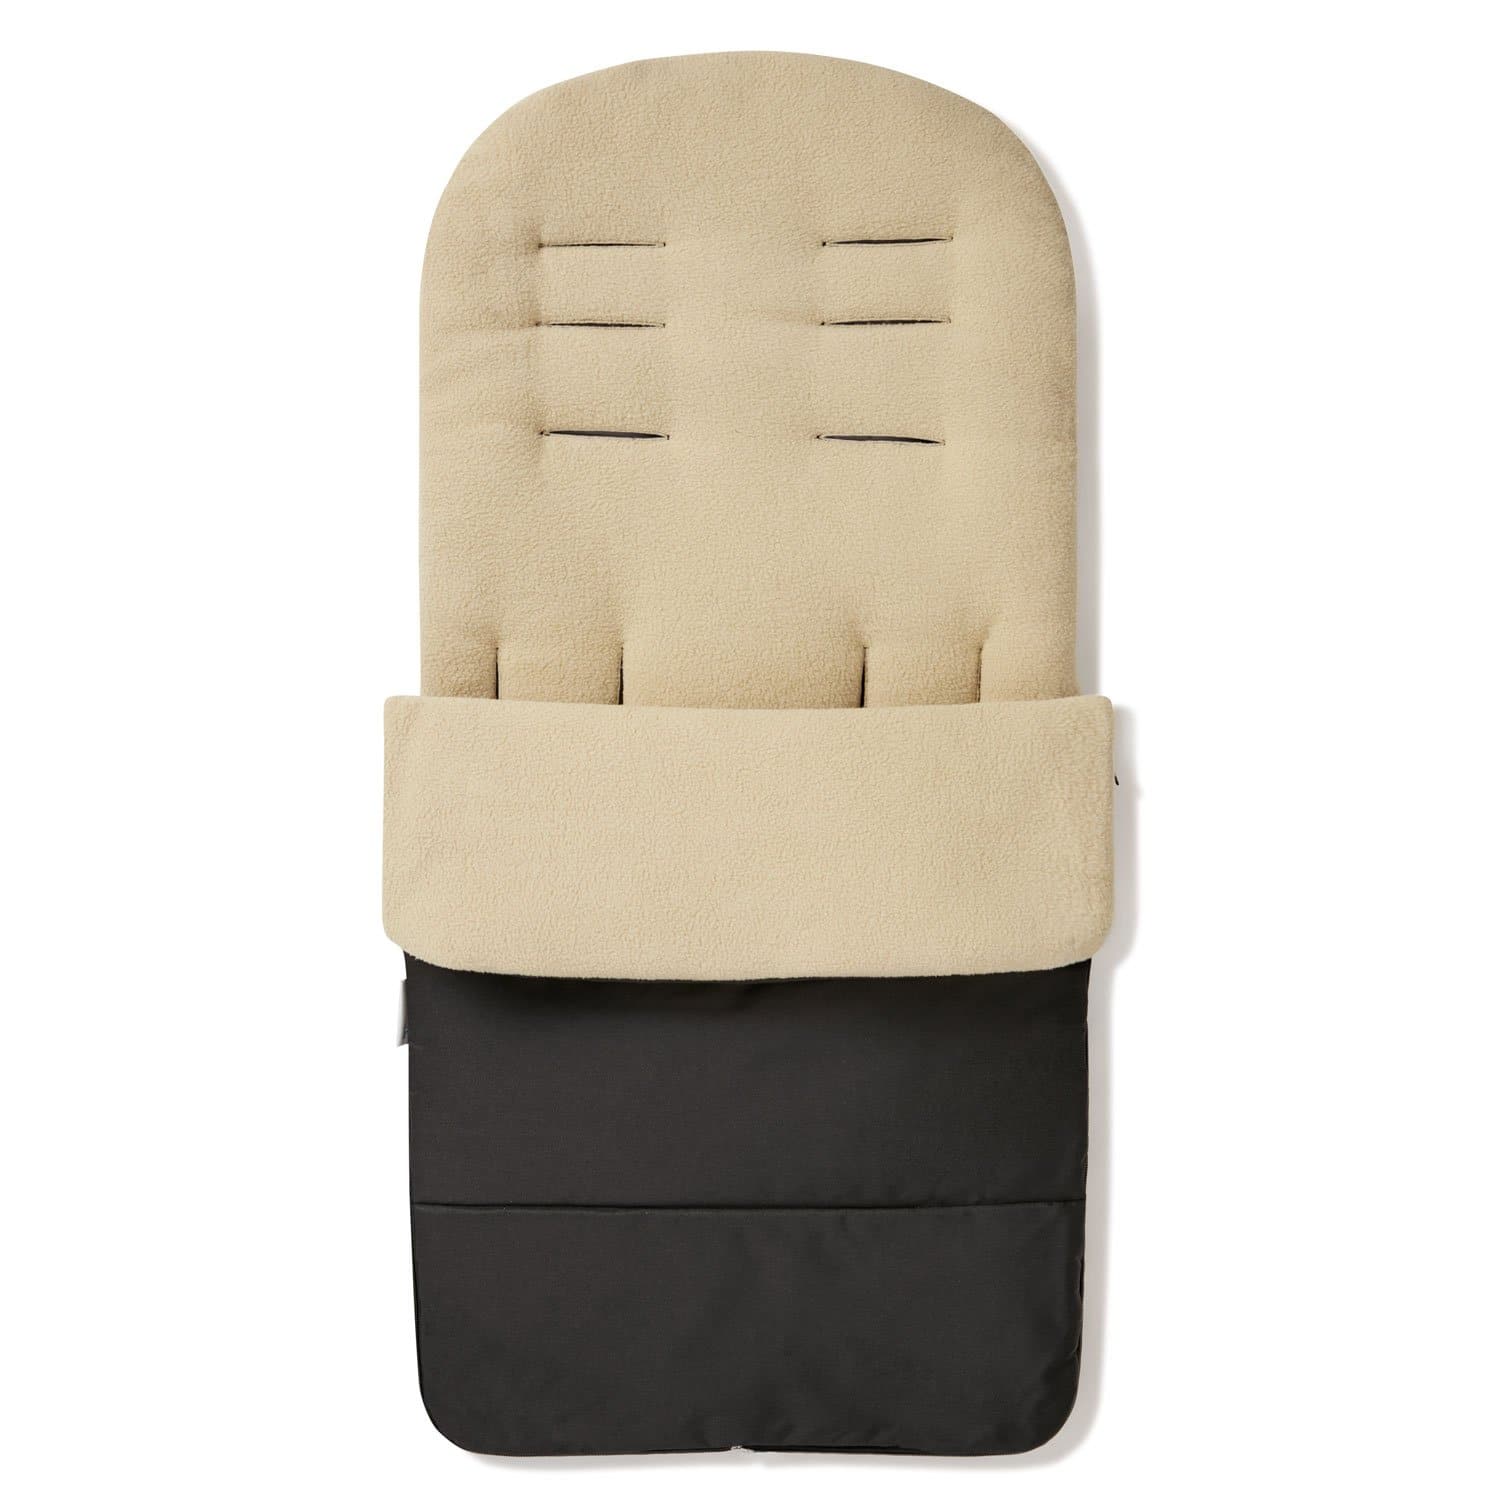 Premium Footmuff / Cosy Toes Compatible with XTS - Desert Sand / Fits All Models | For Your Little One